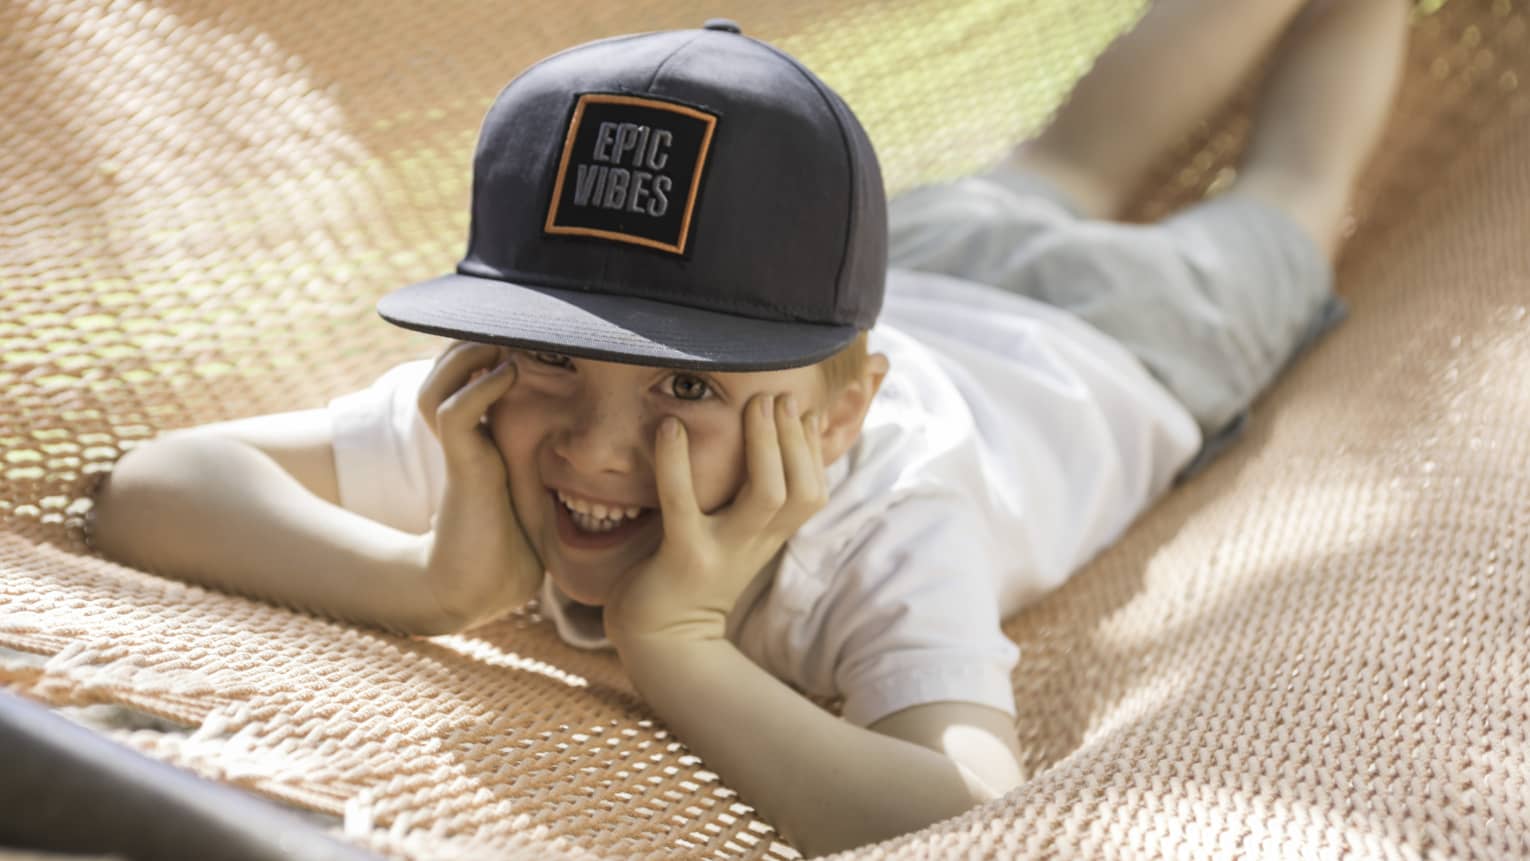 Child laying on hammock on stomach, face in hands and wearing a black cap